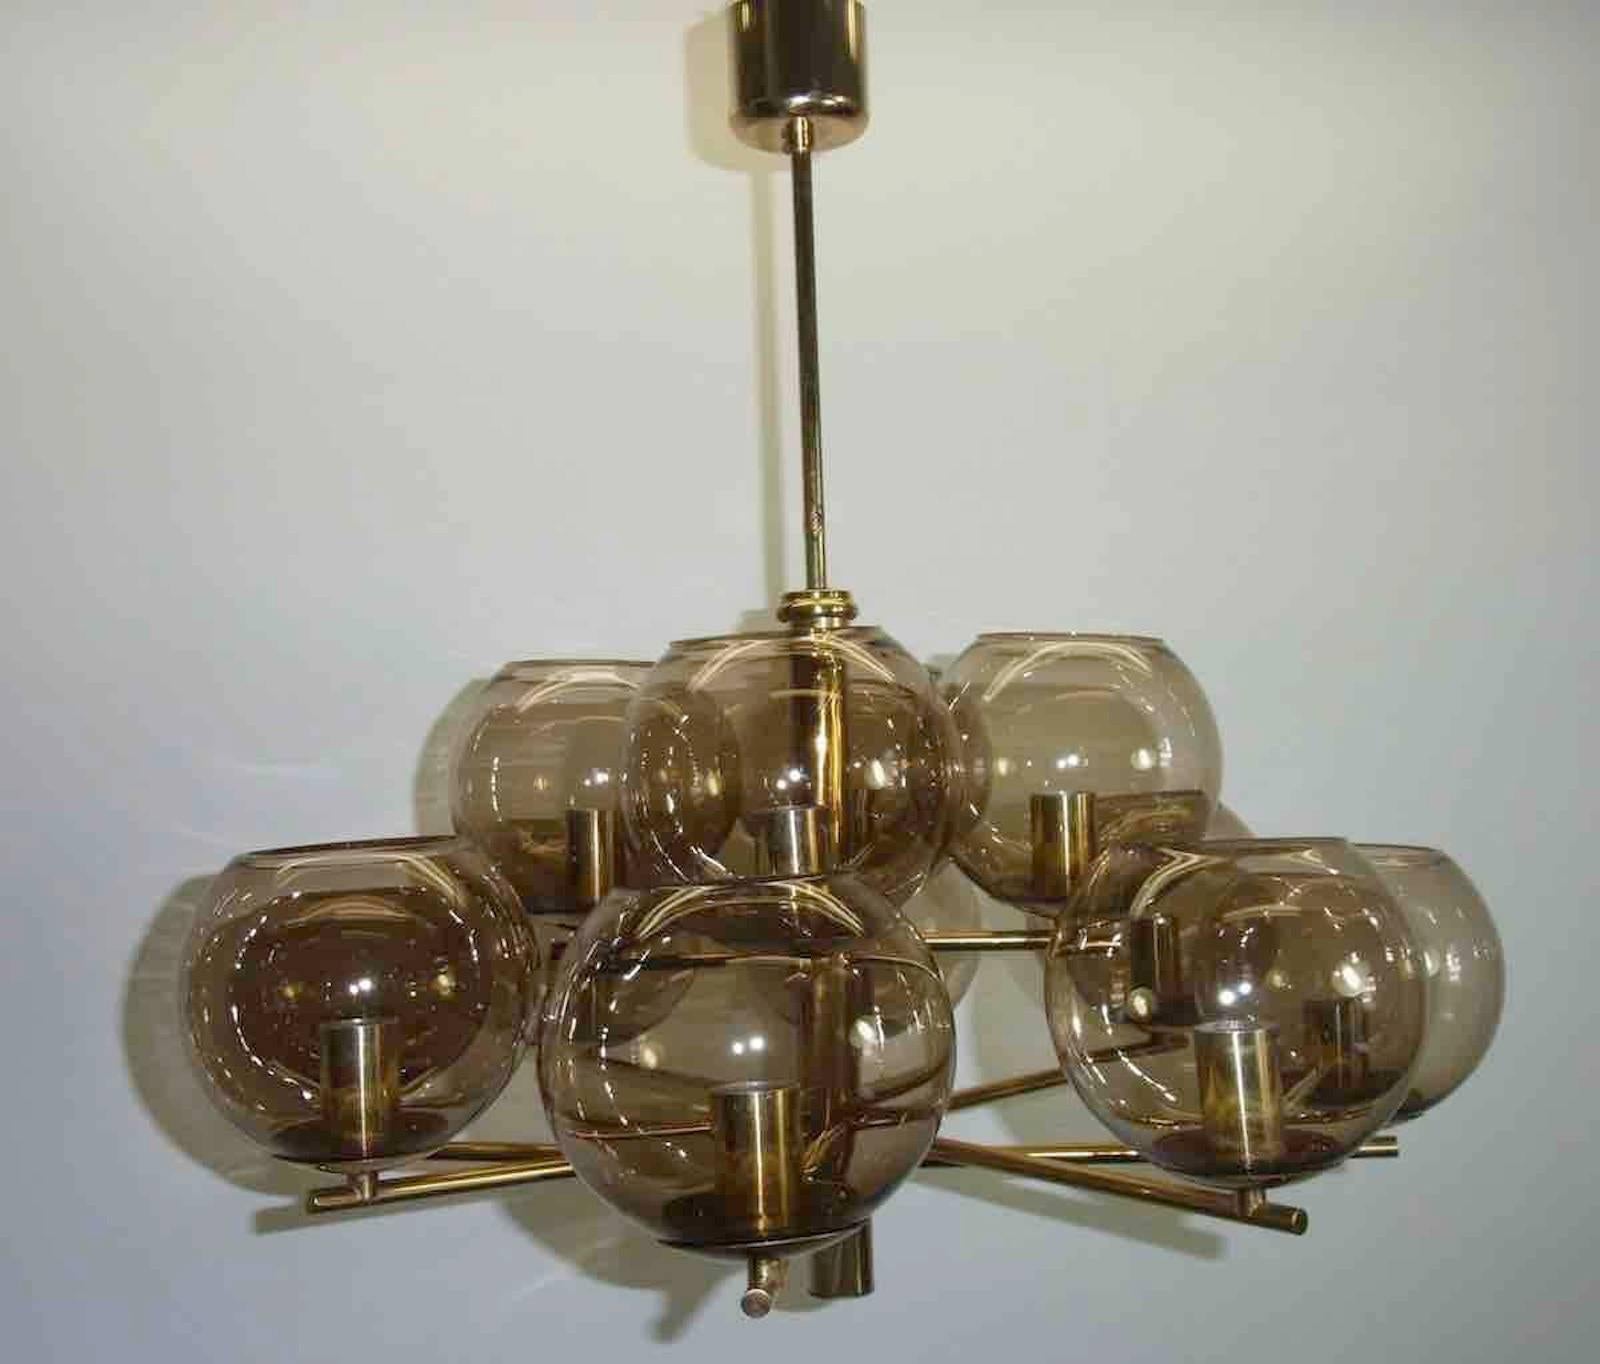 A twelve-light chandelier in its original brass finish with amber globe glass shades designed by Hans-Agne Jakobsson.
 
Fixture requires twelve European E14 candelabra bulb each up to 40 watt. 

Due to the vintage nature of this fixture, there